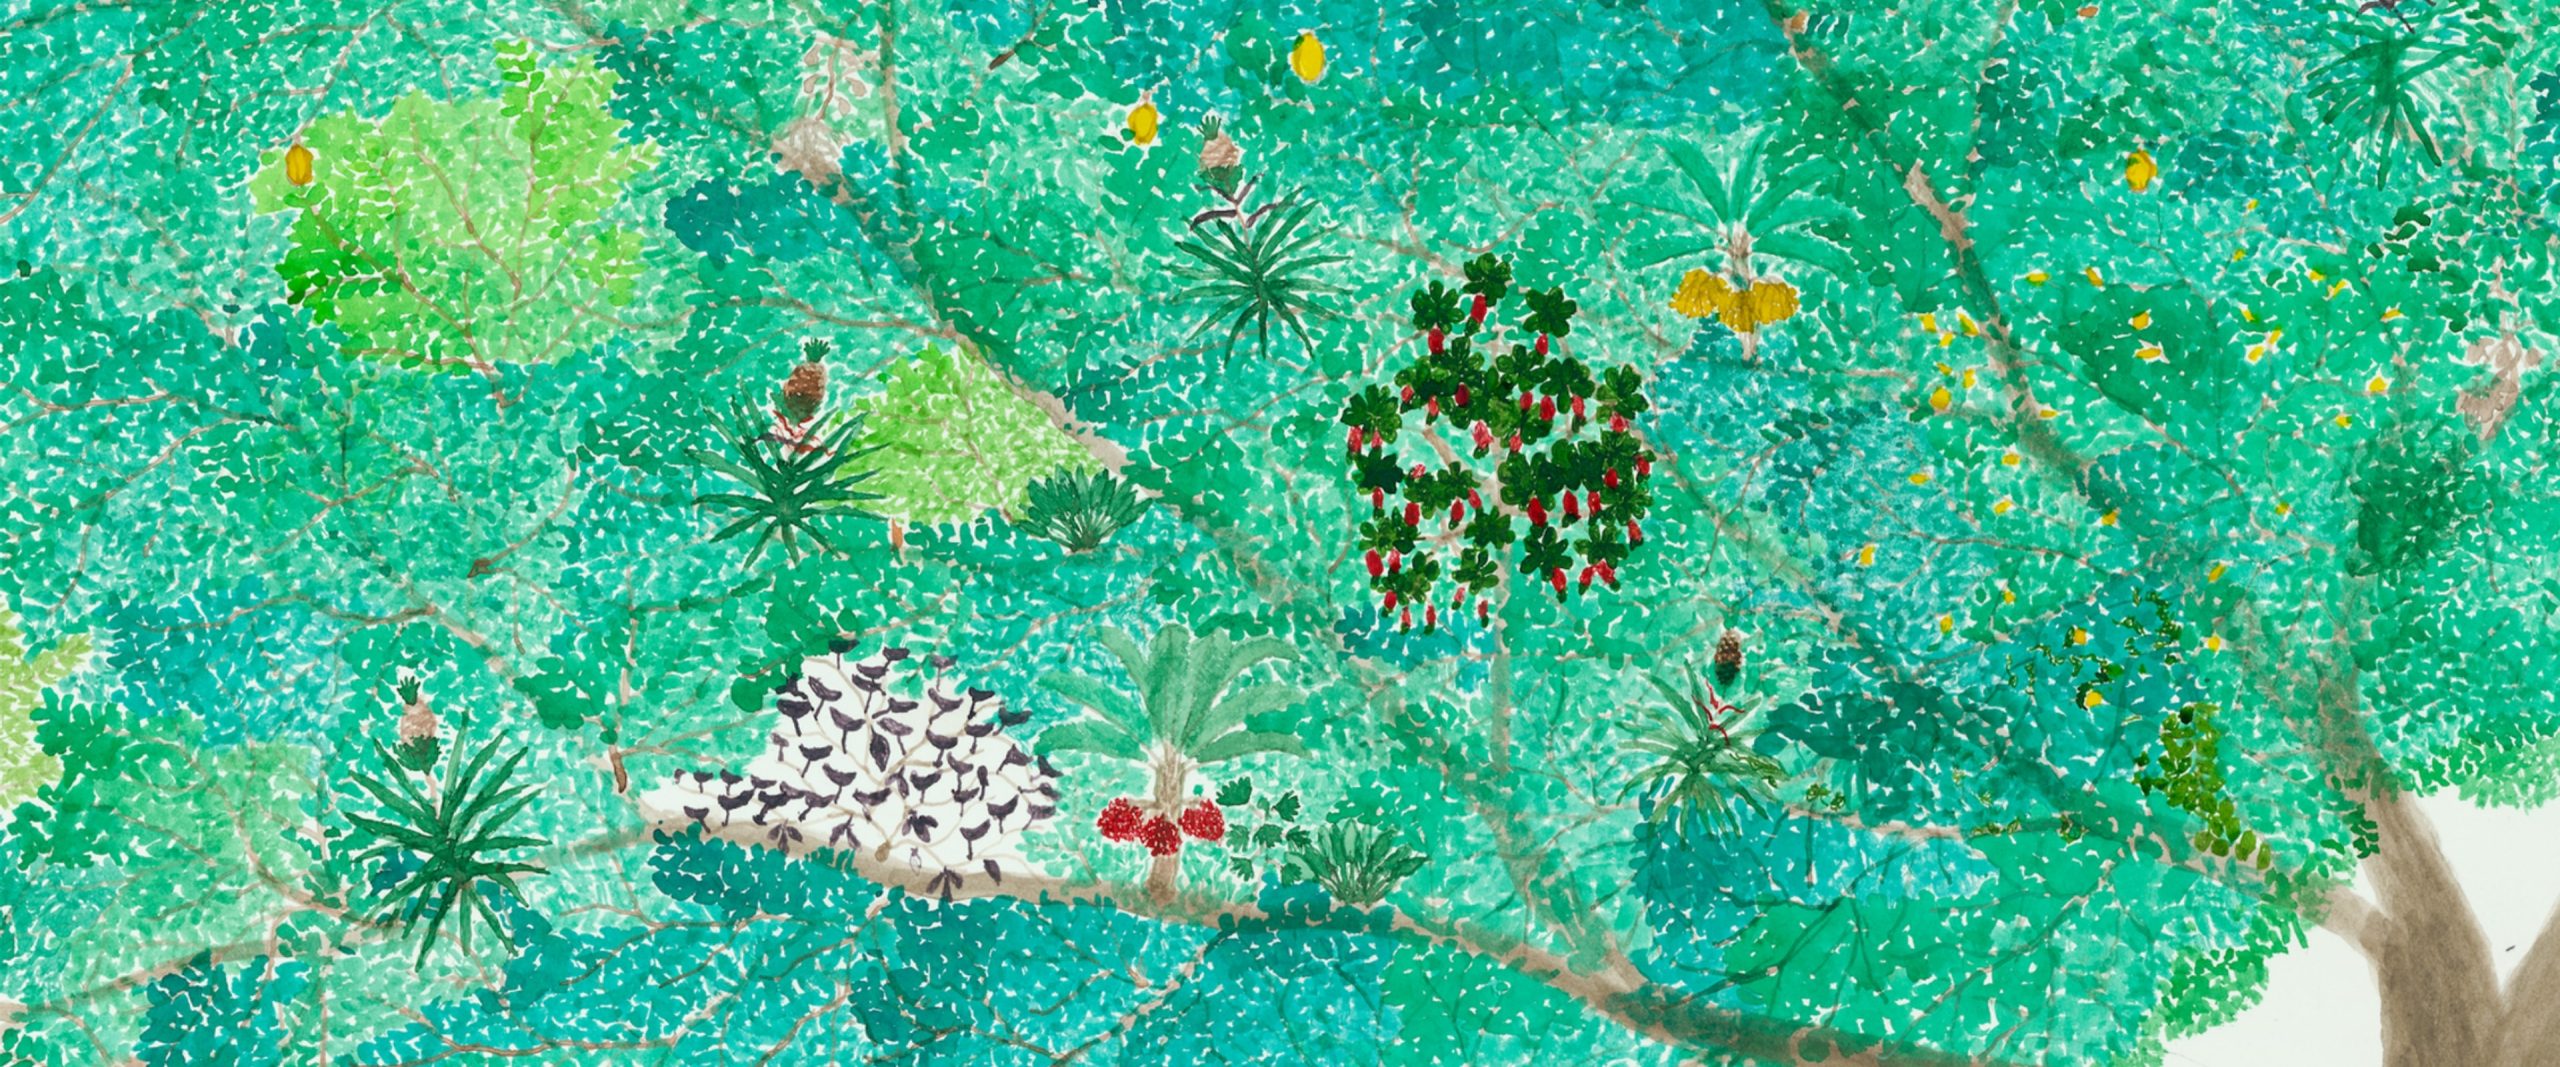 Drawing of a large tree with green leaves and animals on the ground below it